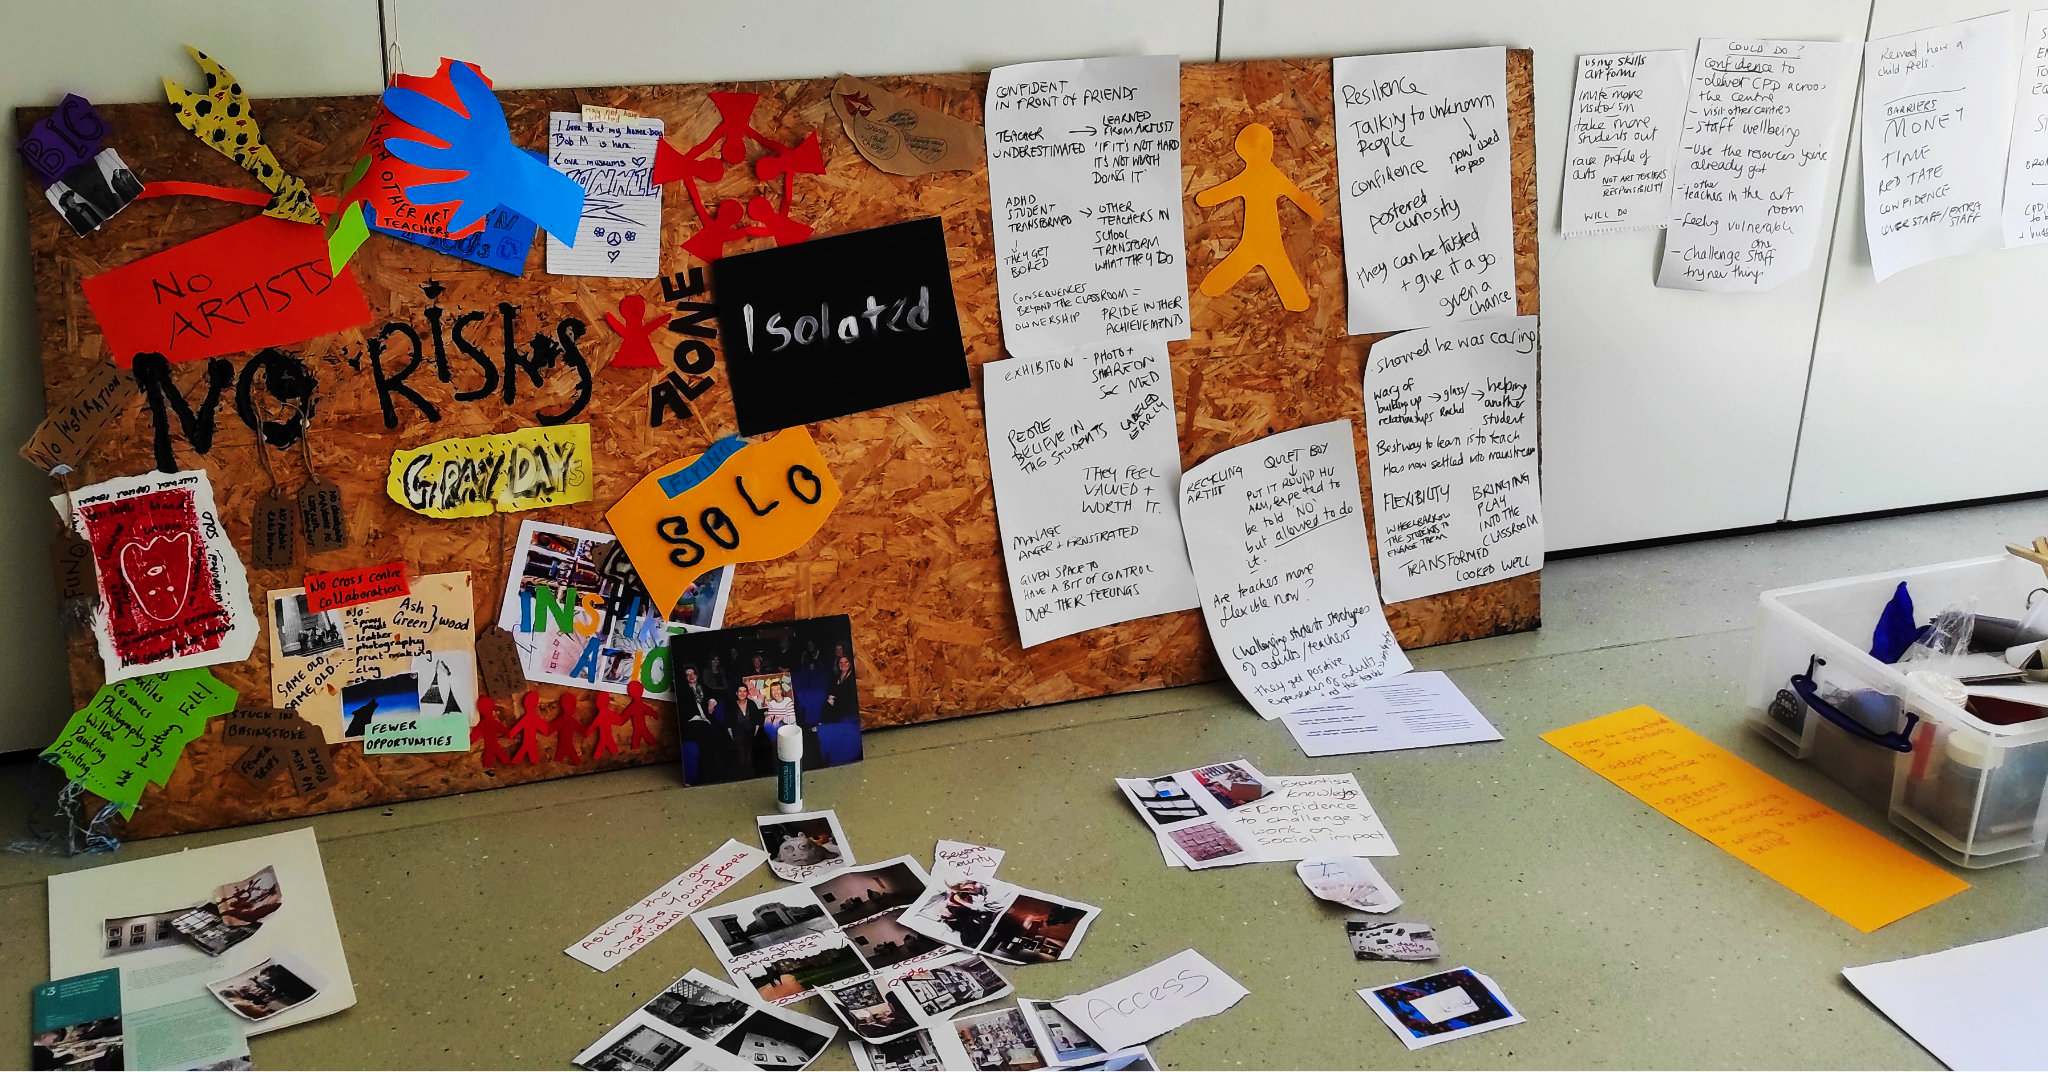 An assortment of participatory artwork, signs and notes attached to a pinboard and wall